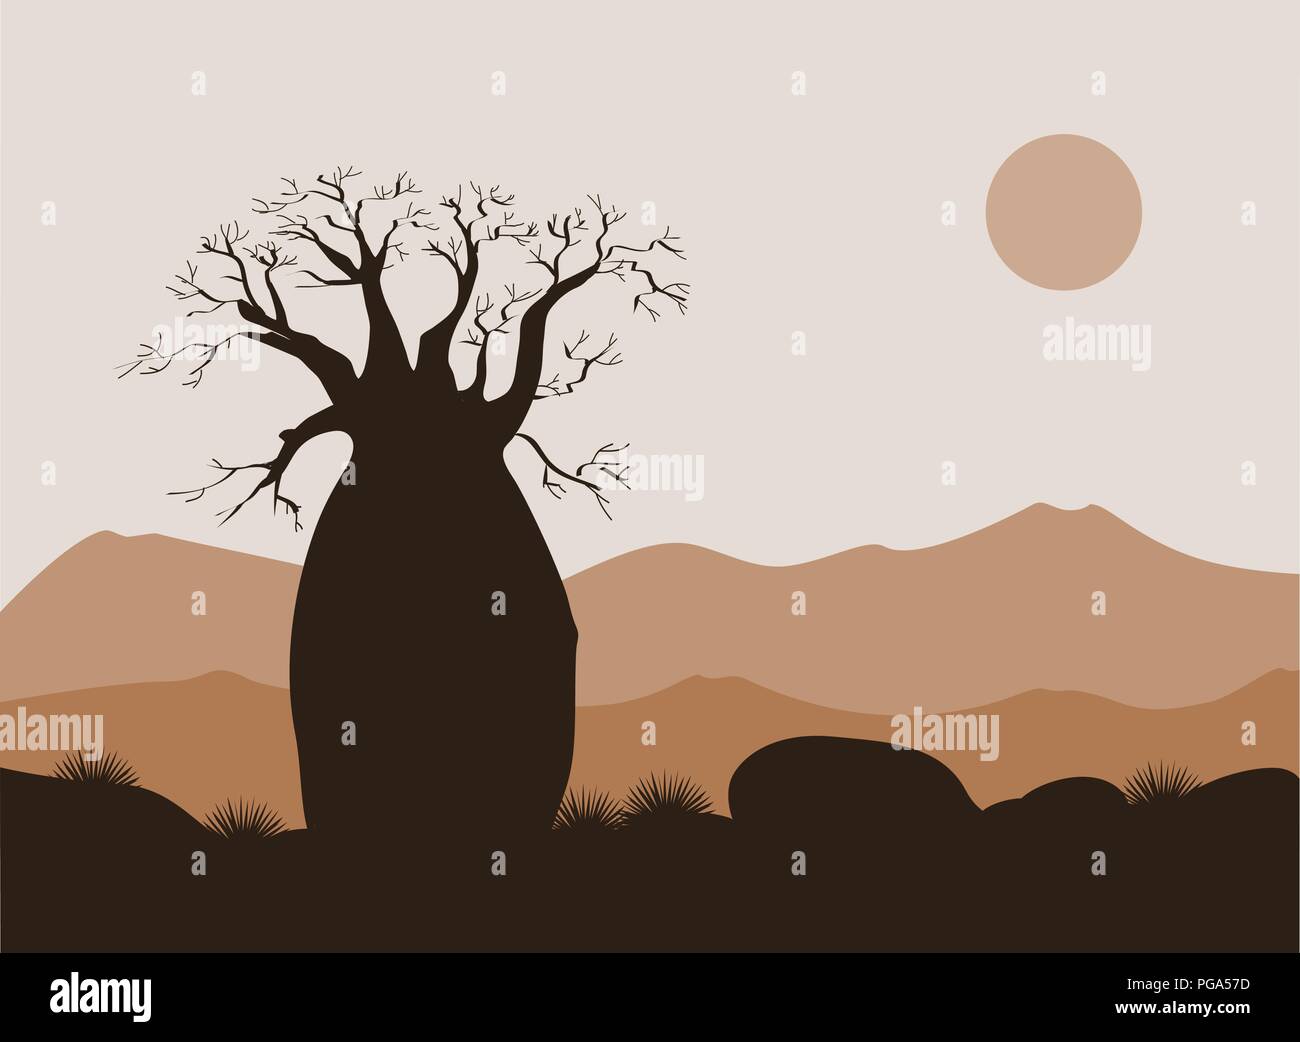 Baobab tree landscape with mountains background. Baobab silhouette. African sunrise. Vector illustration Stock Vector